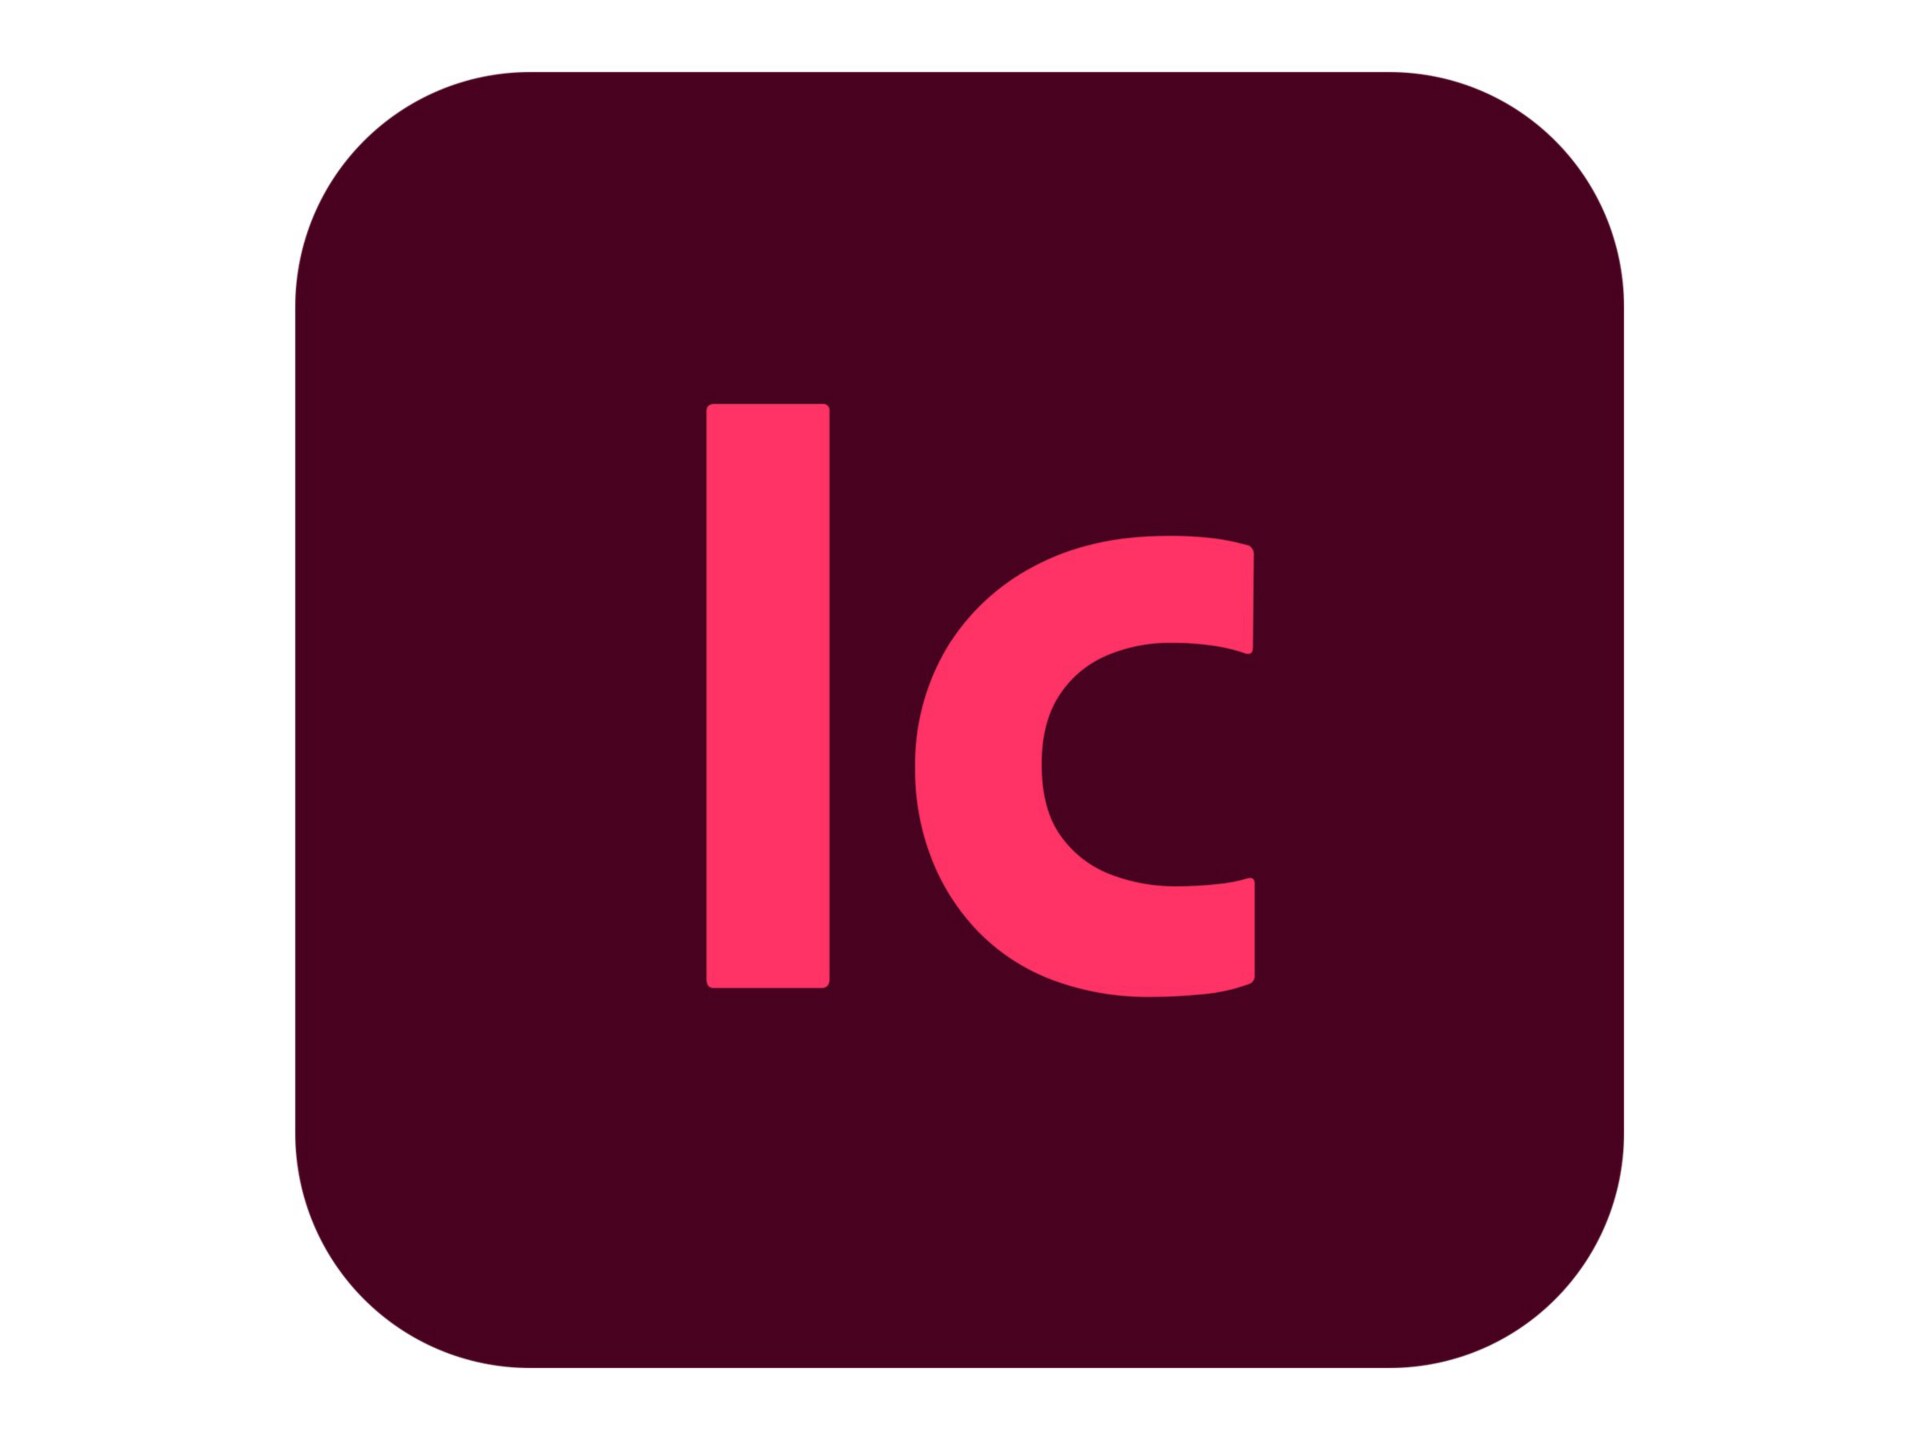 Adobe InCopy CC - Subscription New (19 months) - 1 user